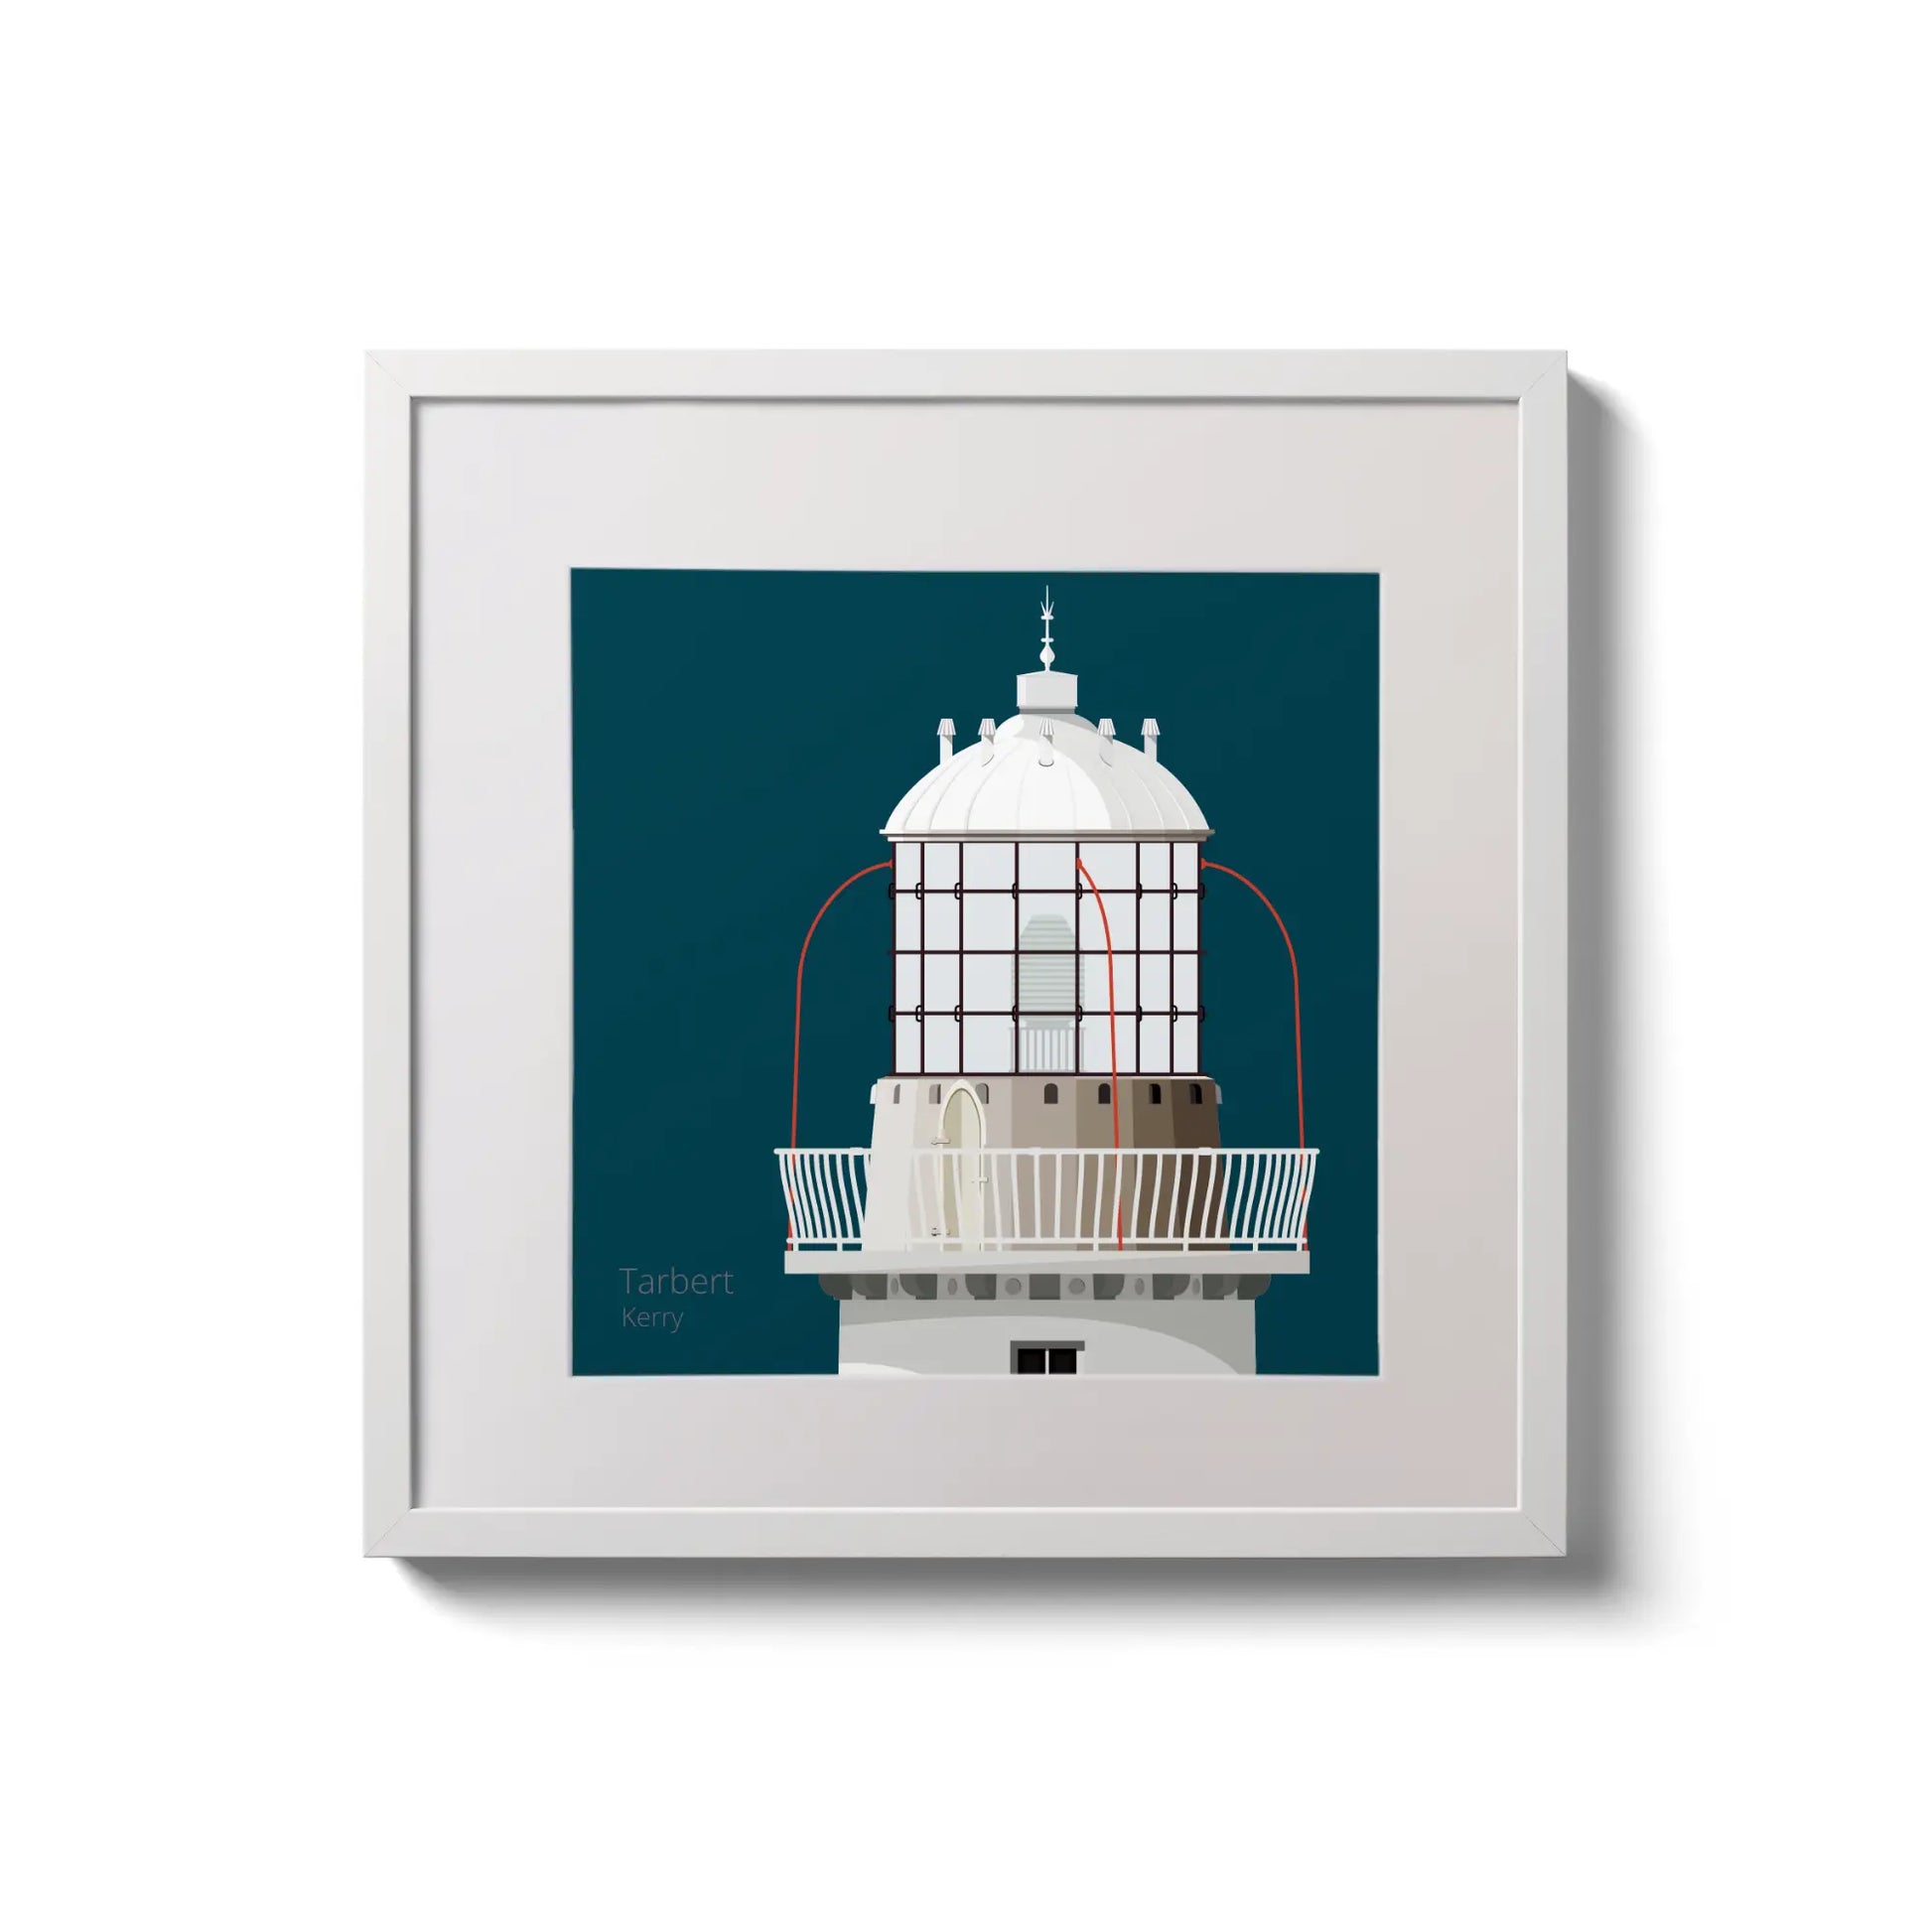 Framed wall art decoration Tarbert lighthouse on a midnight blue background,  in a white square frame measuring 20x20cm.